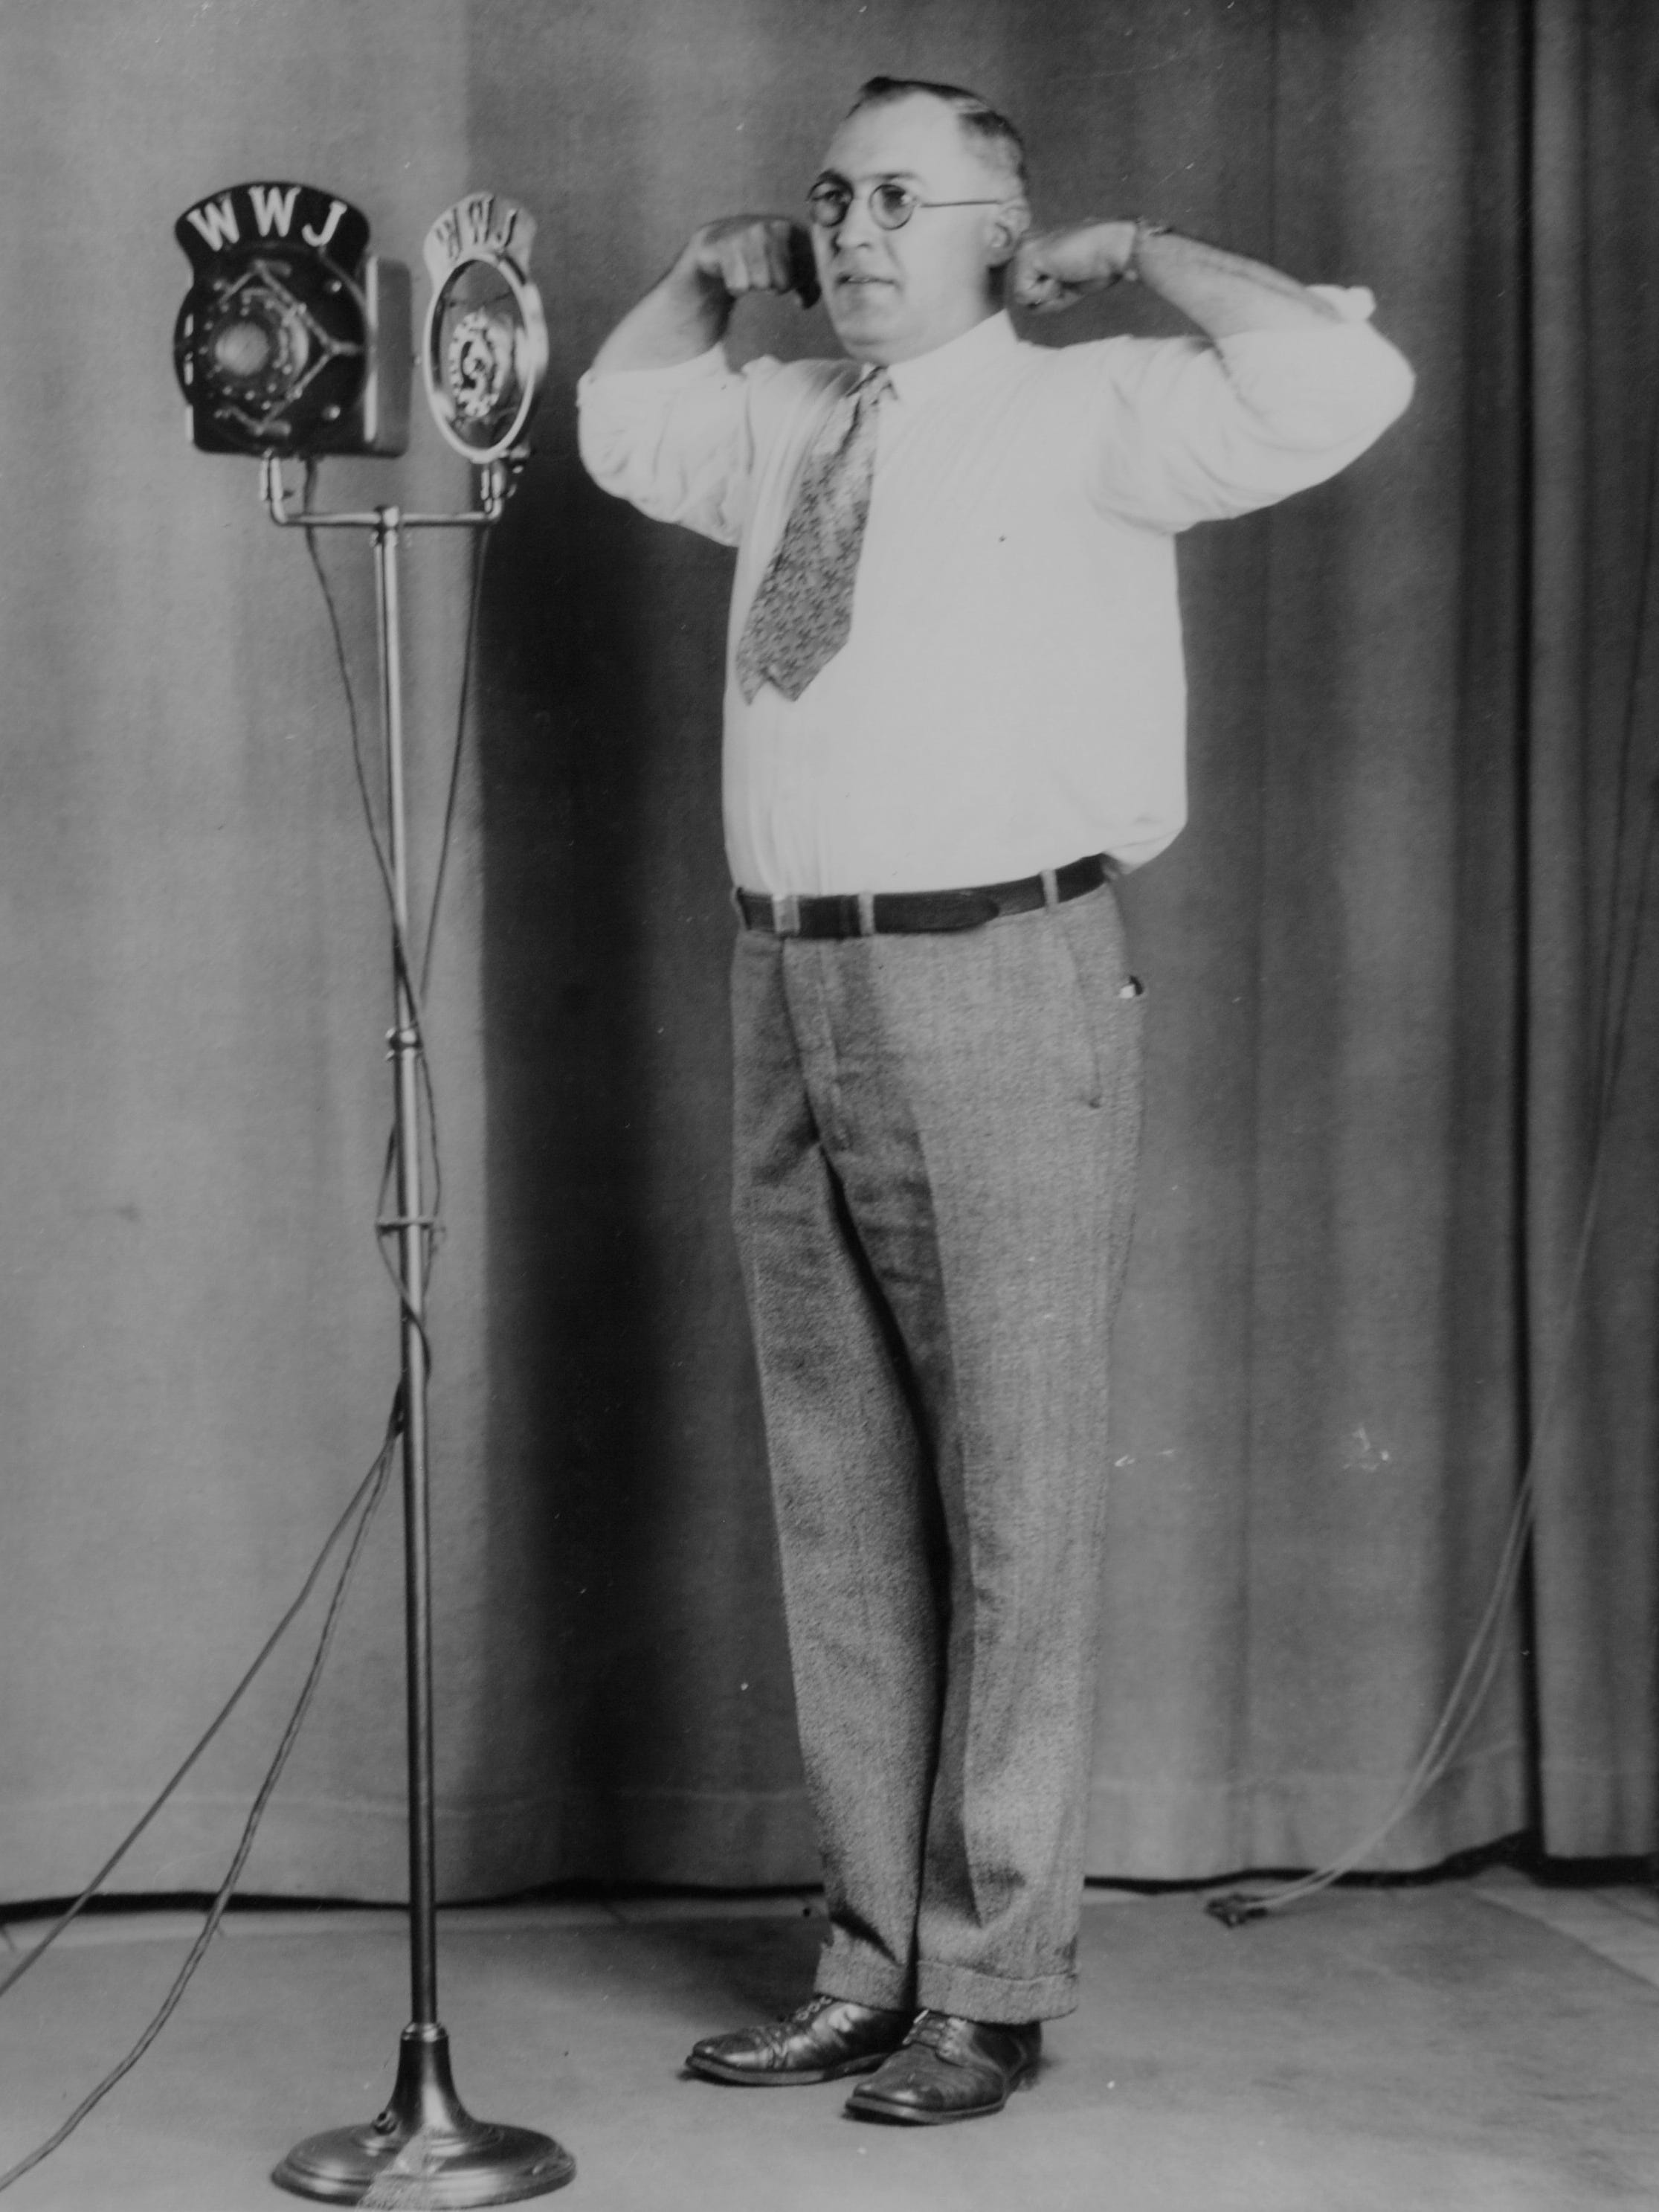 The first morning exercise program on WWJ was conducted by Roy J. Horton, formerly director of the YMCA, on Feb. 23, 1924.  Other programs in the 1920s and '30s included news, sports and entertainment shows,   a dinner menu broadcast by the News' household editor, tips on home decoration and homebuilding, beauty aids, weather and time reports, luncheon music by leading ensembles and orchestras of Detroit hotels and highway bulletins.